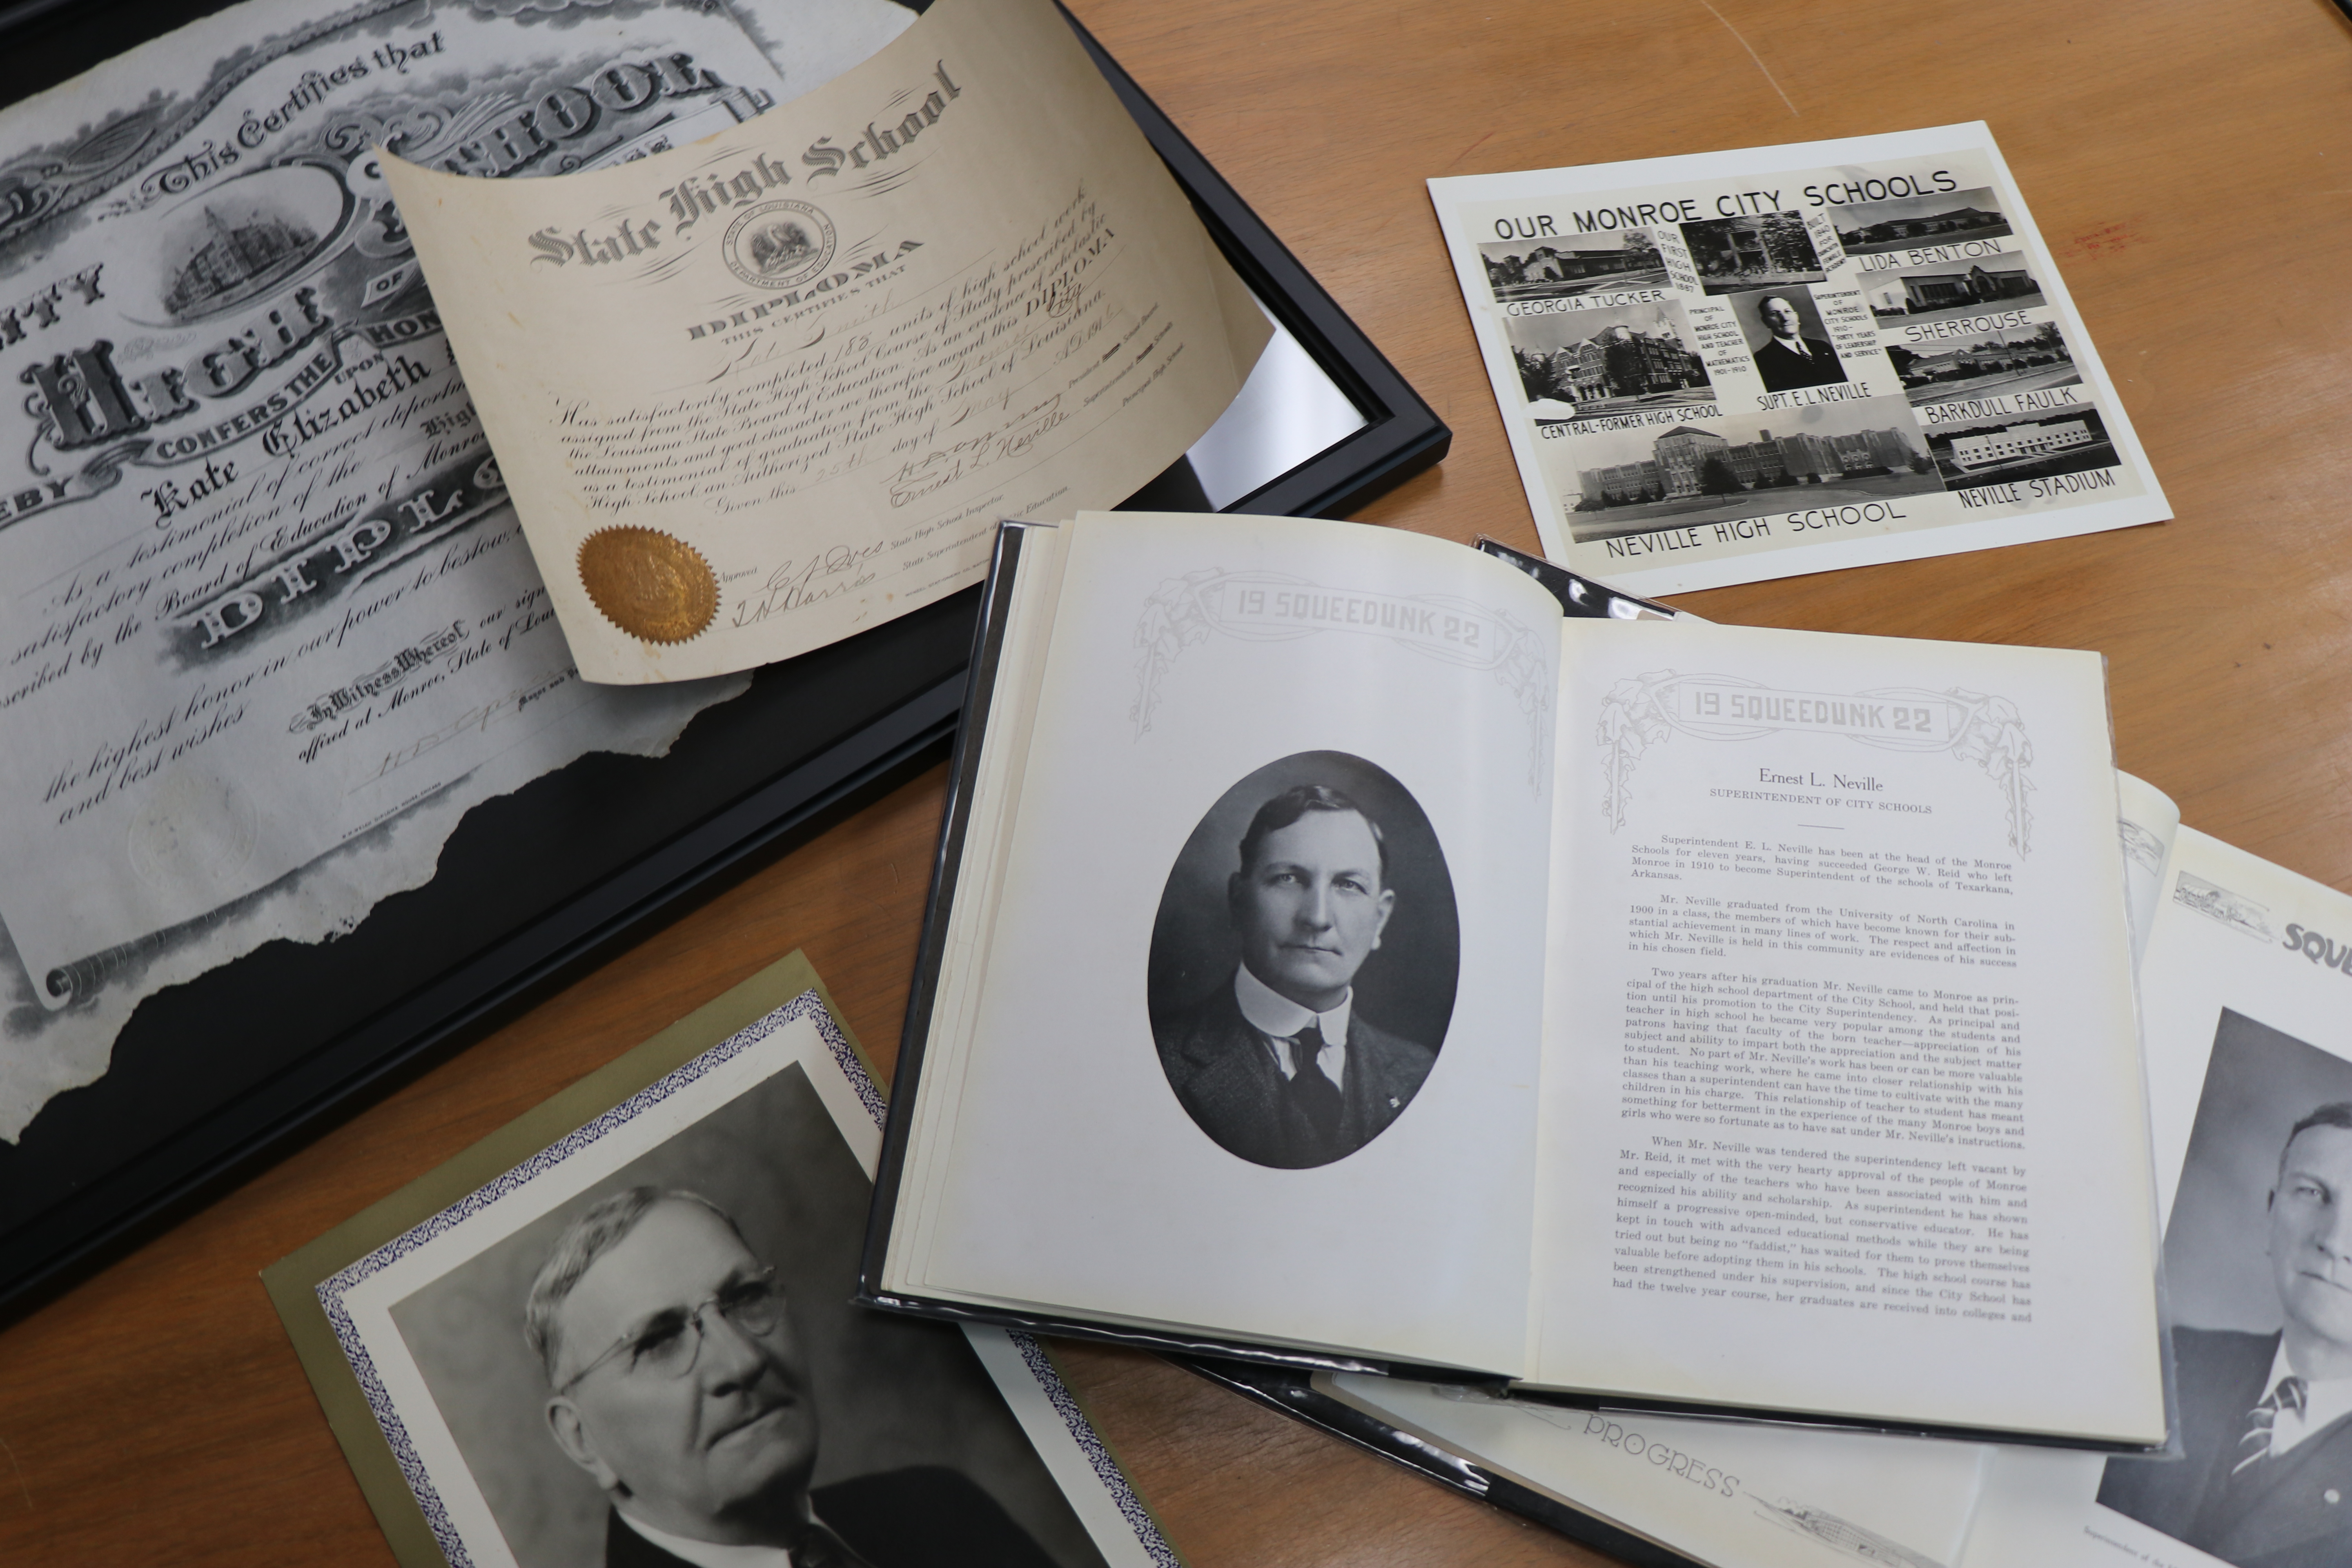 A table featuring various historical items: a portrait of Ernest Long Neville, a high school diploma, the Squeedunk 1922 yearbook open to a portrait of Ernest Neville